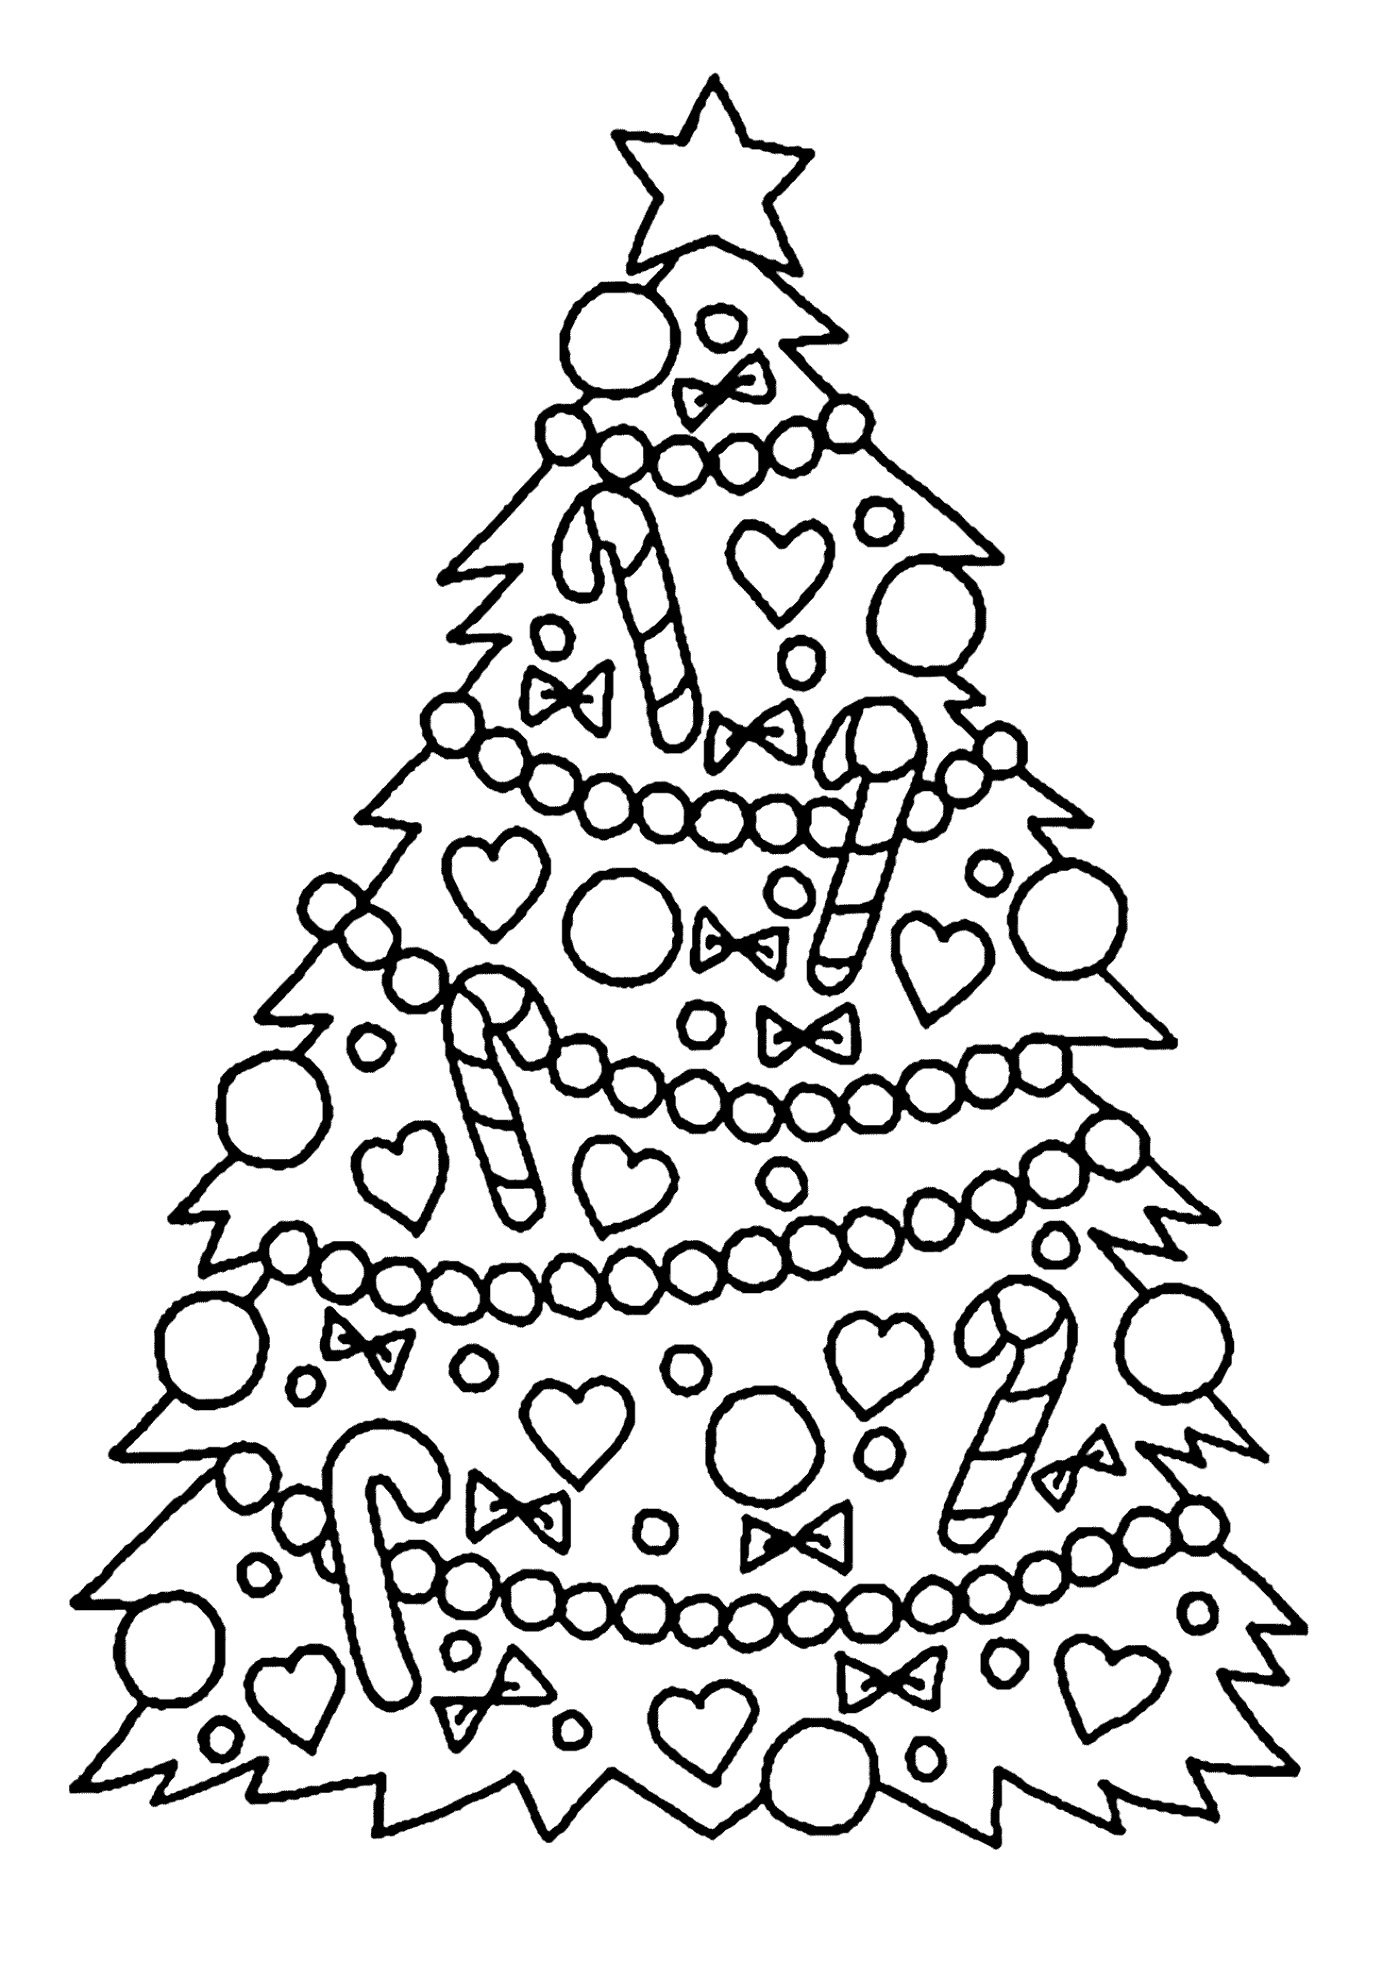 Sparkly Christmas Lights Coloring Pages - 101 Coloring